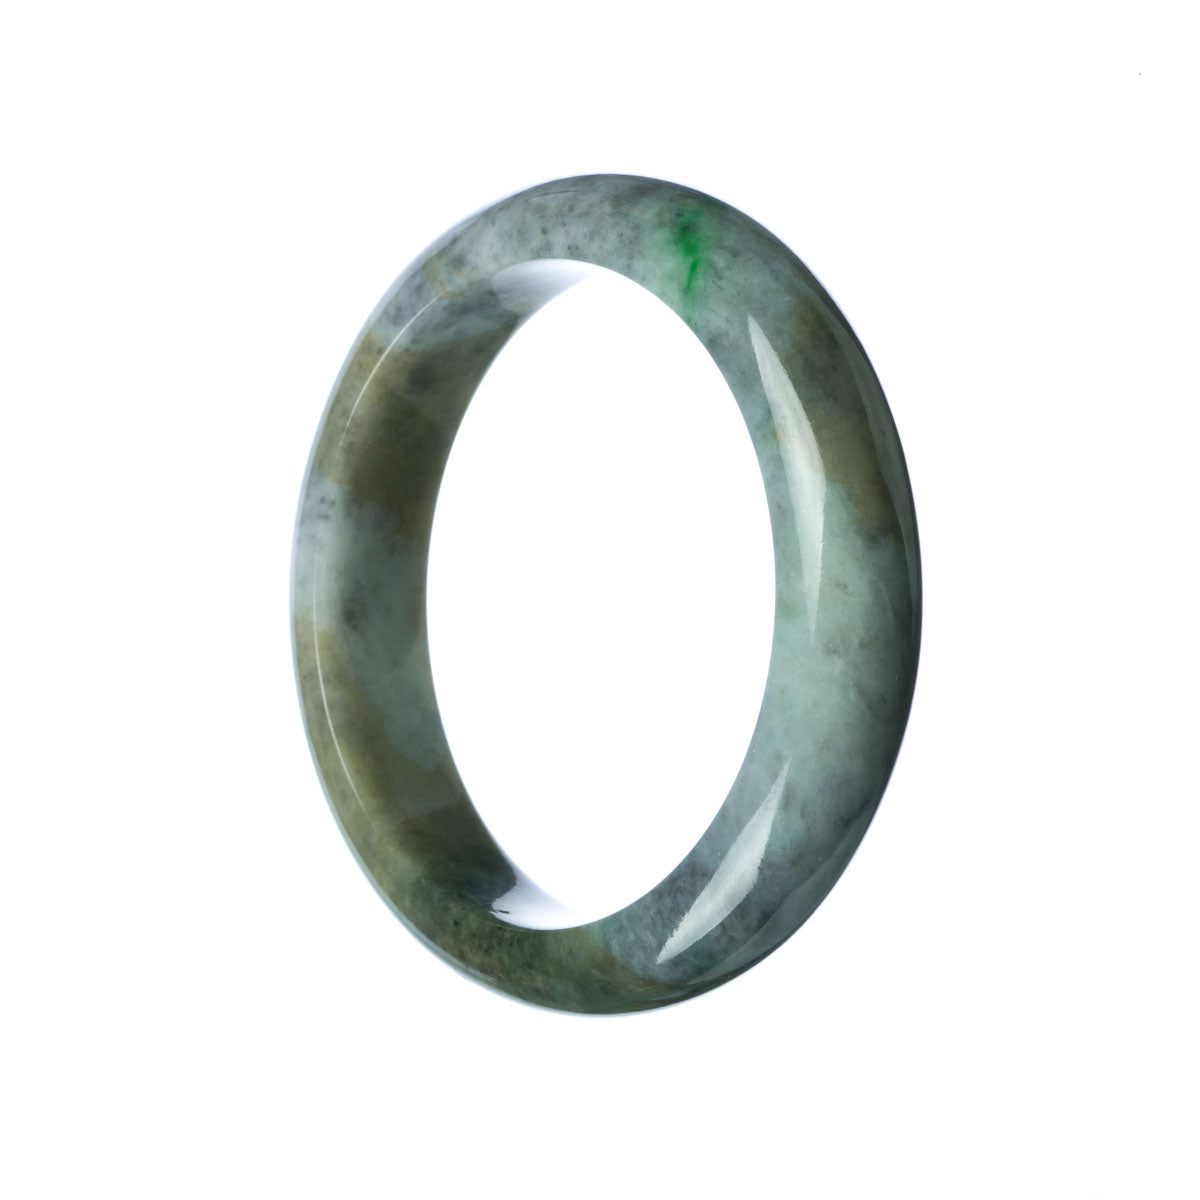 A close-up image of a beautiful bracelet made of grey green jade, shaped like a half moon. The bracelet is untreated and made with genuine jade stones. It measures 59mm in size. A stunning piece from MAYS GEMS.